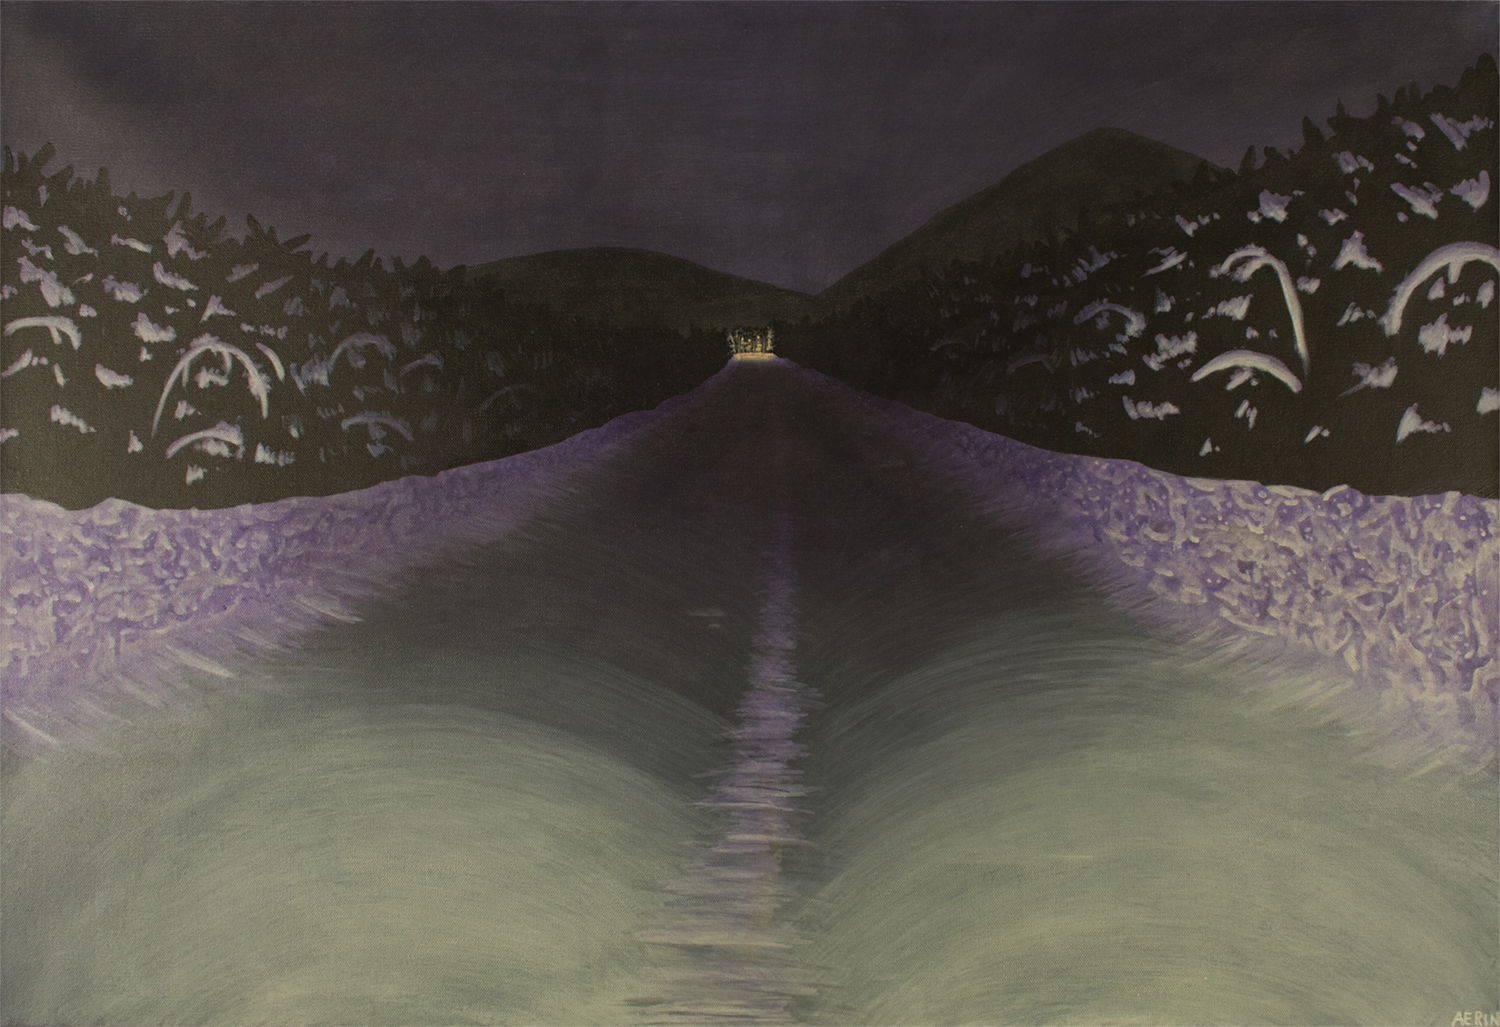 snow covered road at night surrounded by trees with a glowing light in the distance, courtesy of the artist